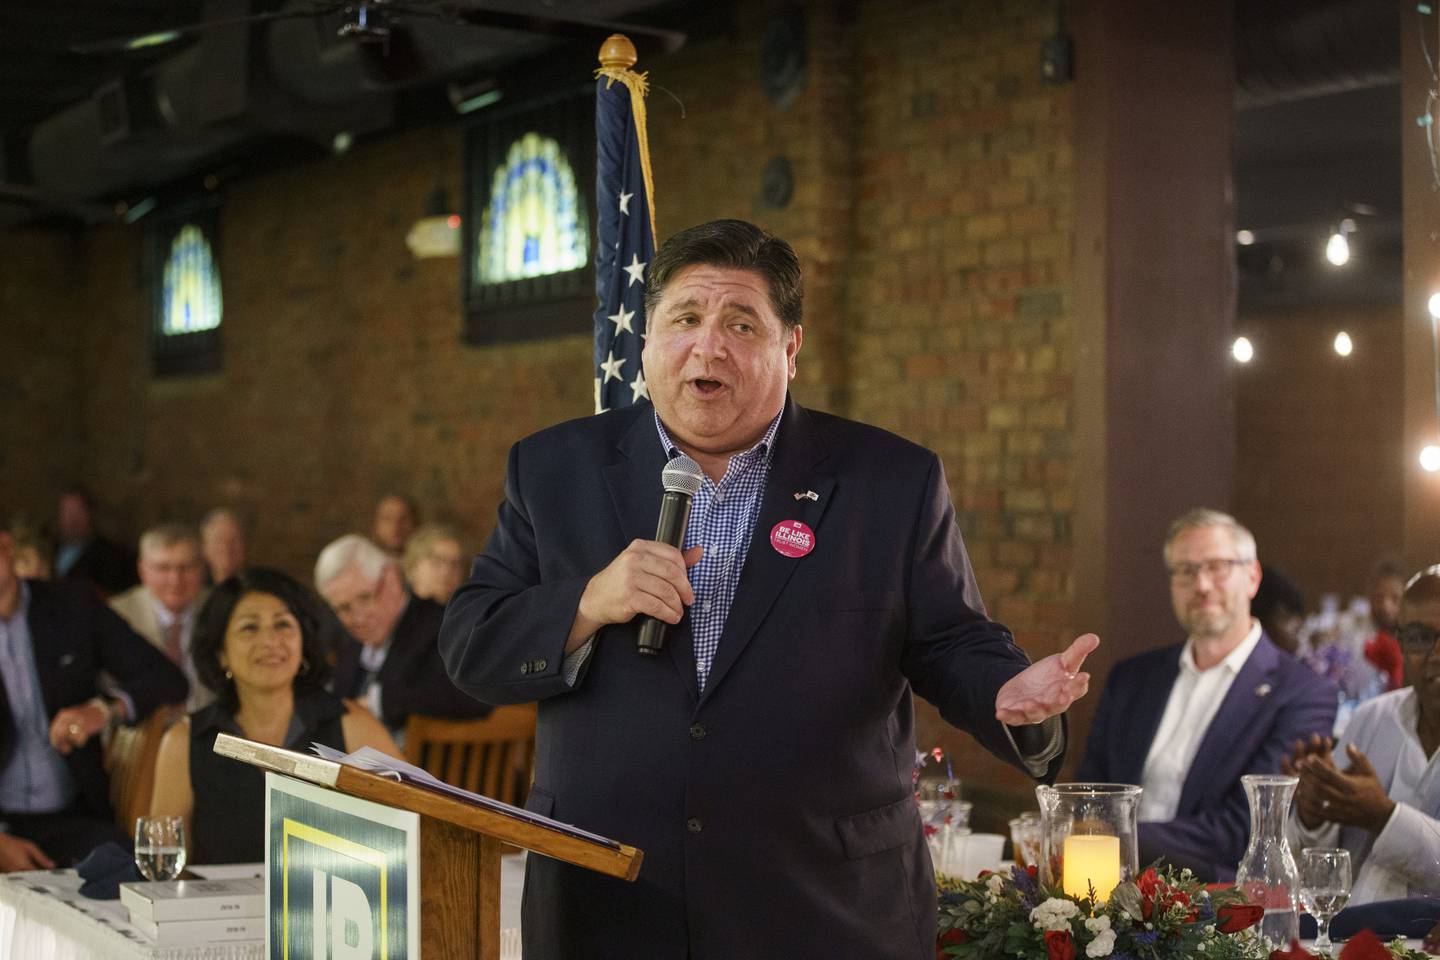 Gov. J.B. Pritzker at the Jackson County Democrats annual dinner during the “Working Families Bus Tour” on Aug. 25, 2022, in Murphysboro.